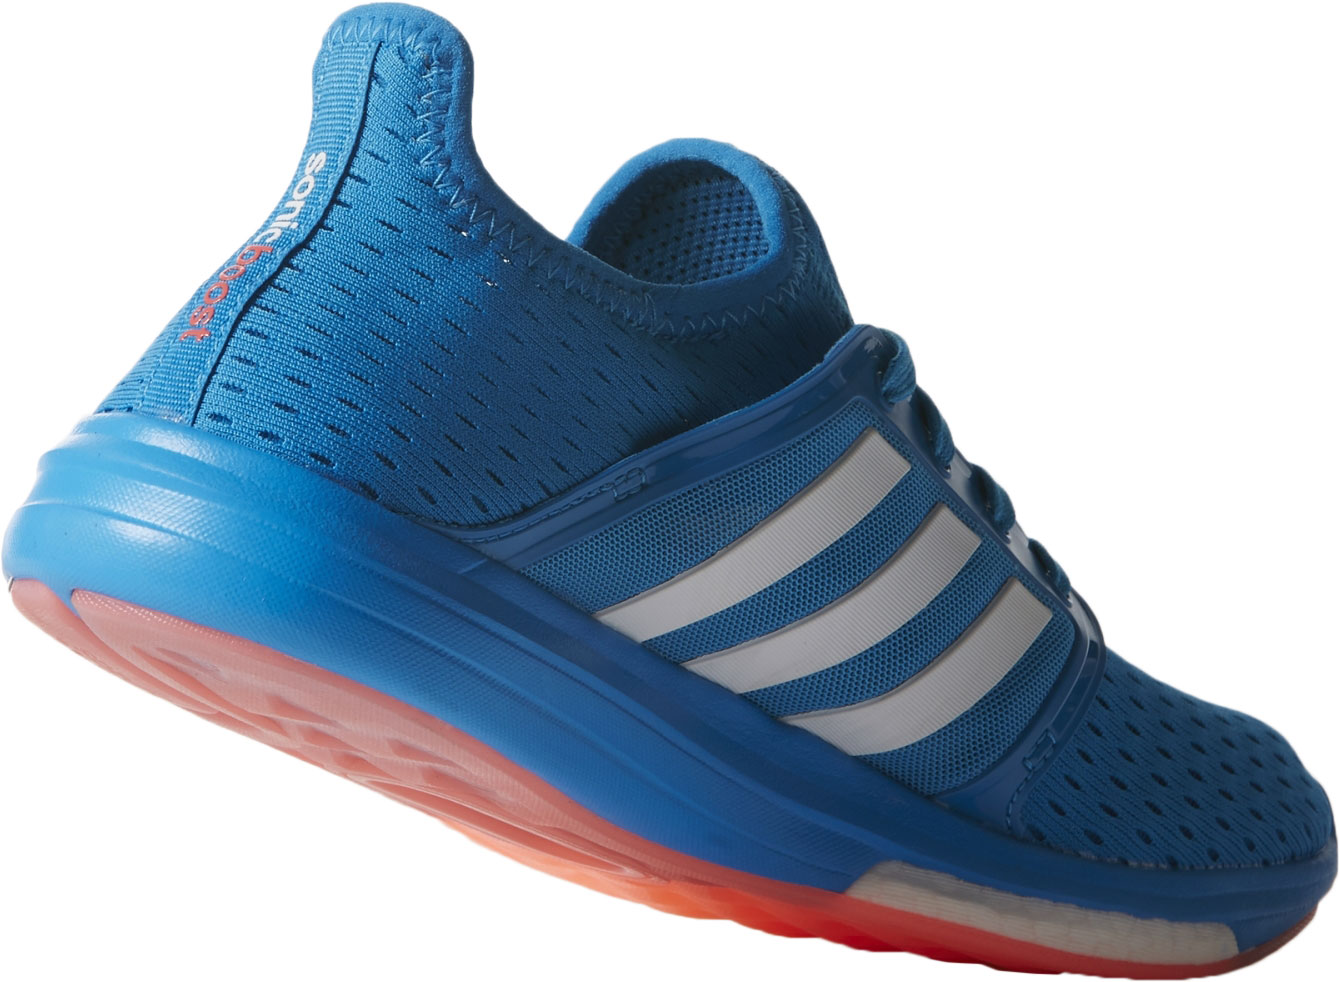 Women’s Running Shoes - SONIC BOOST W